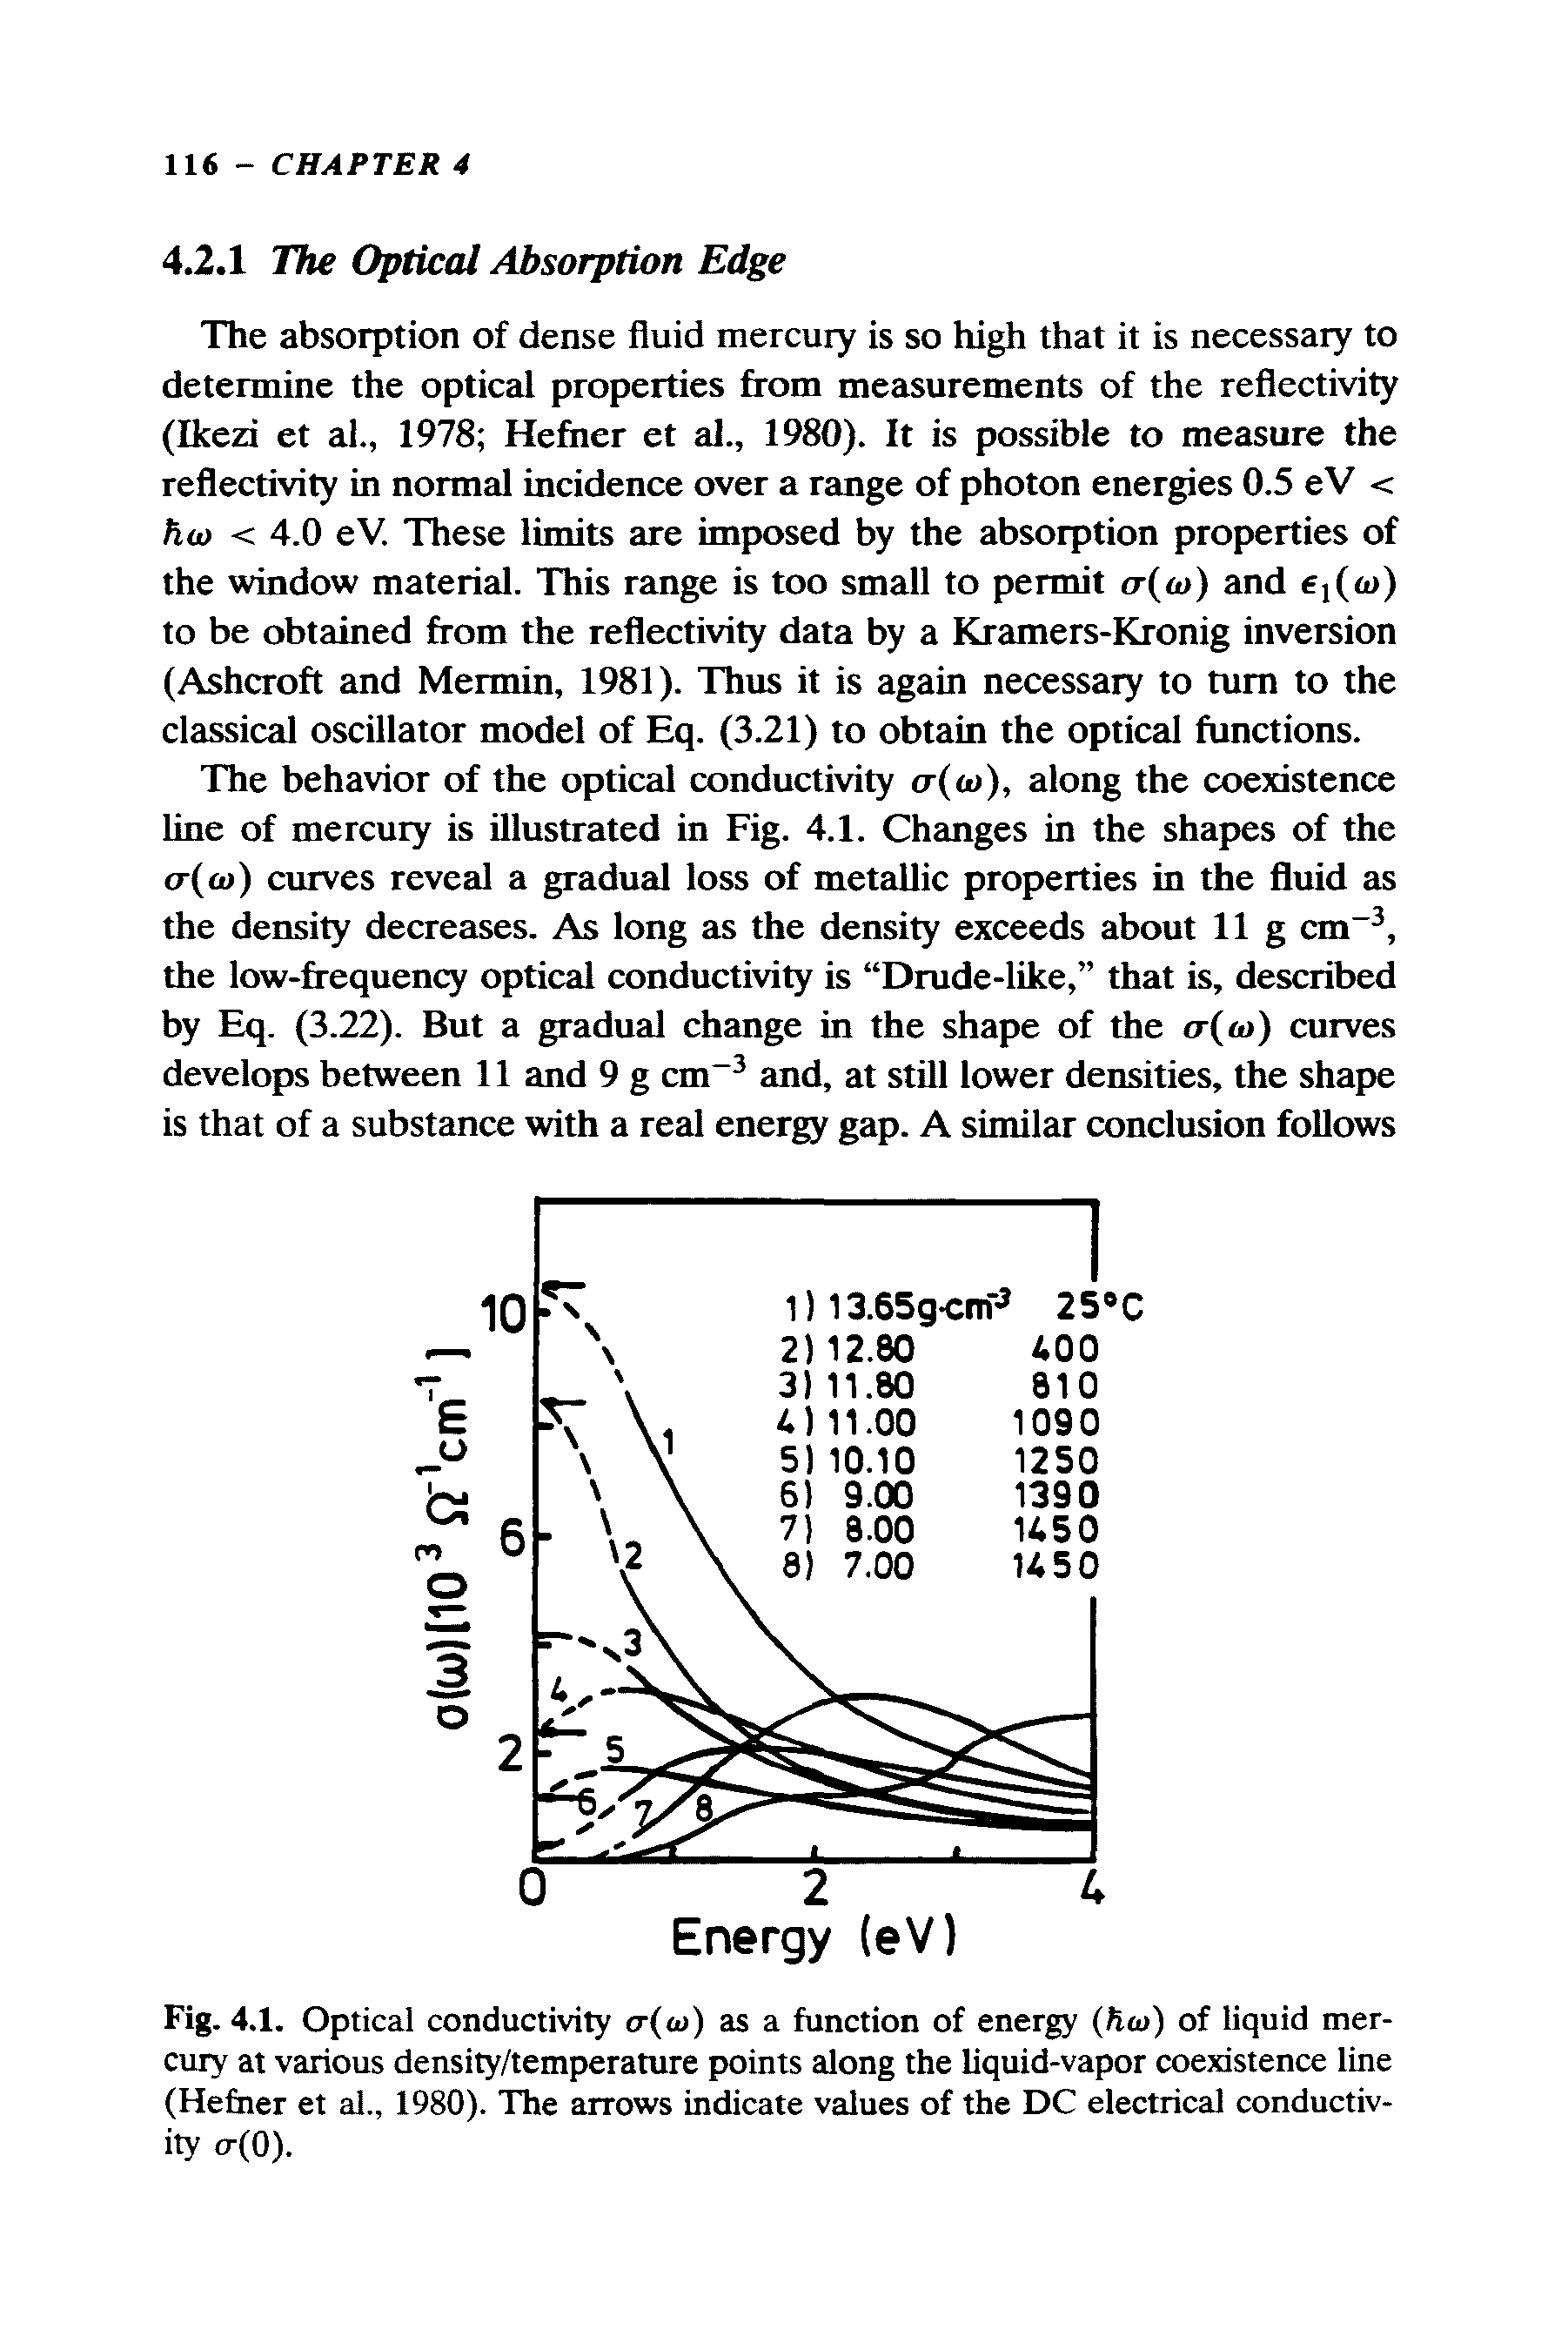 Fig. 4.1. Optical conductivity <r(o)) as a function of energy (hw) of liquid mer-ciuy at various density/temperature points along the liquid-vapor coexistence line (Hefner et al., 1980). The arrows indicate values of the DC electrical conductivity o-(O).